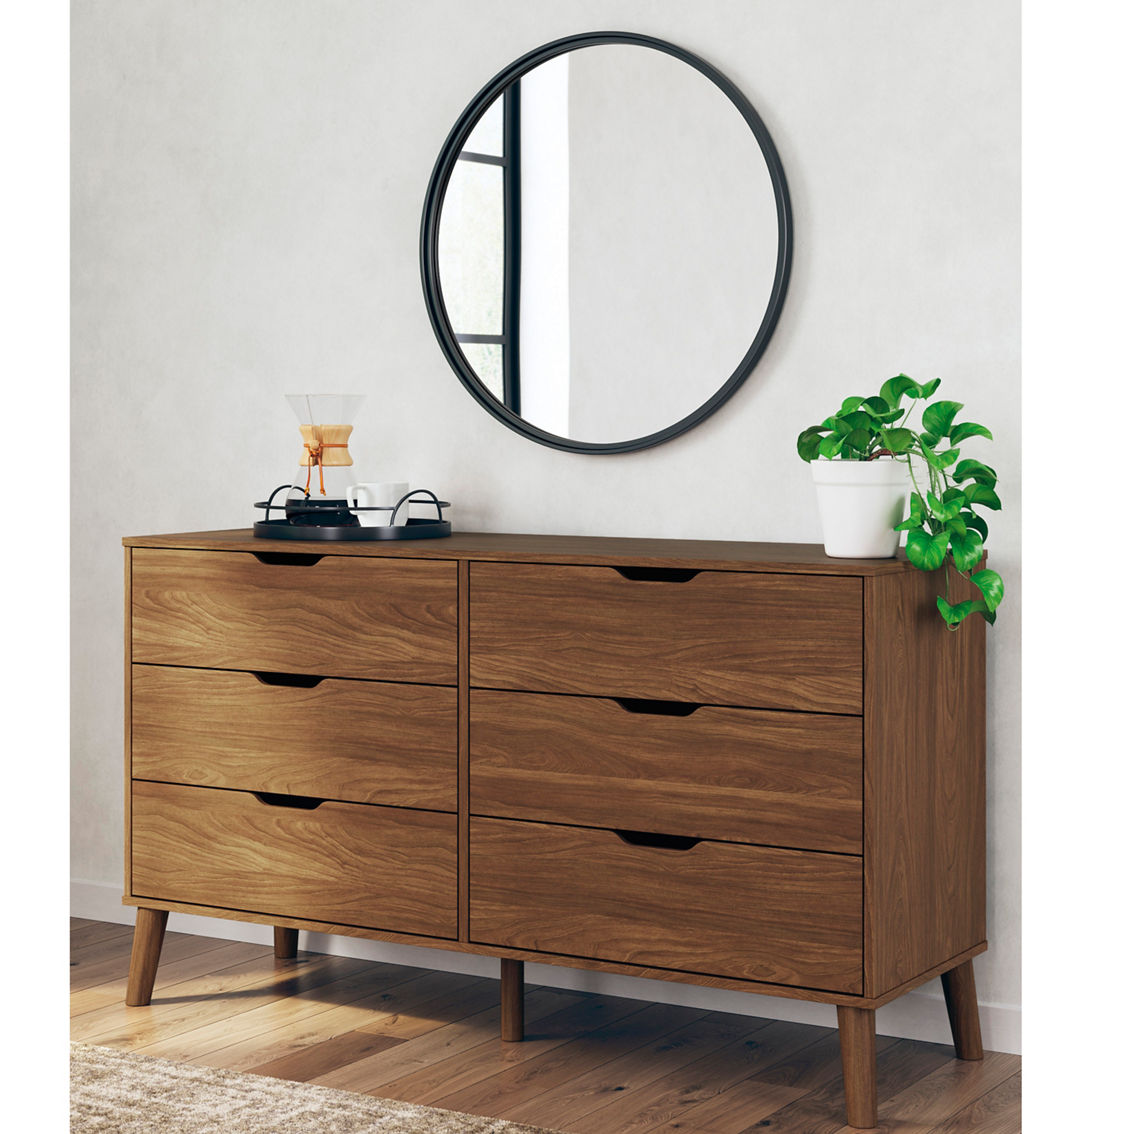 Signature Design by Ashley Fordmont Ready-to-Assemble Dresser - Image 6 of 8